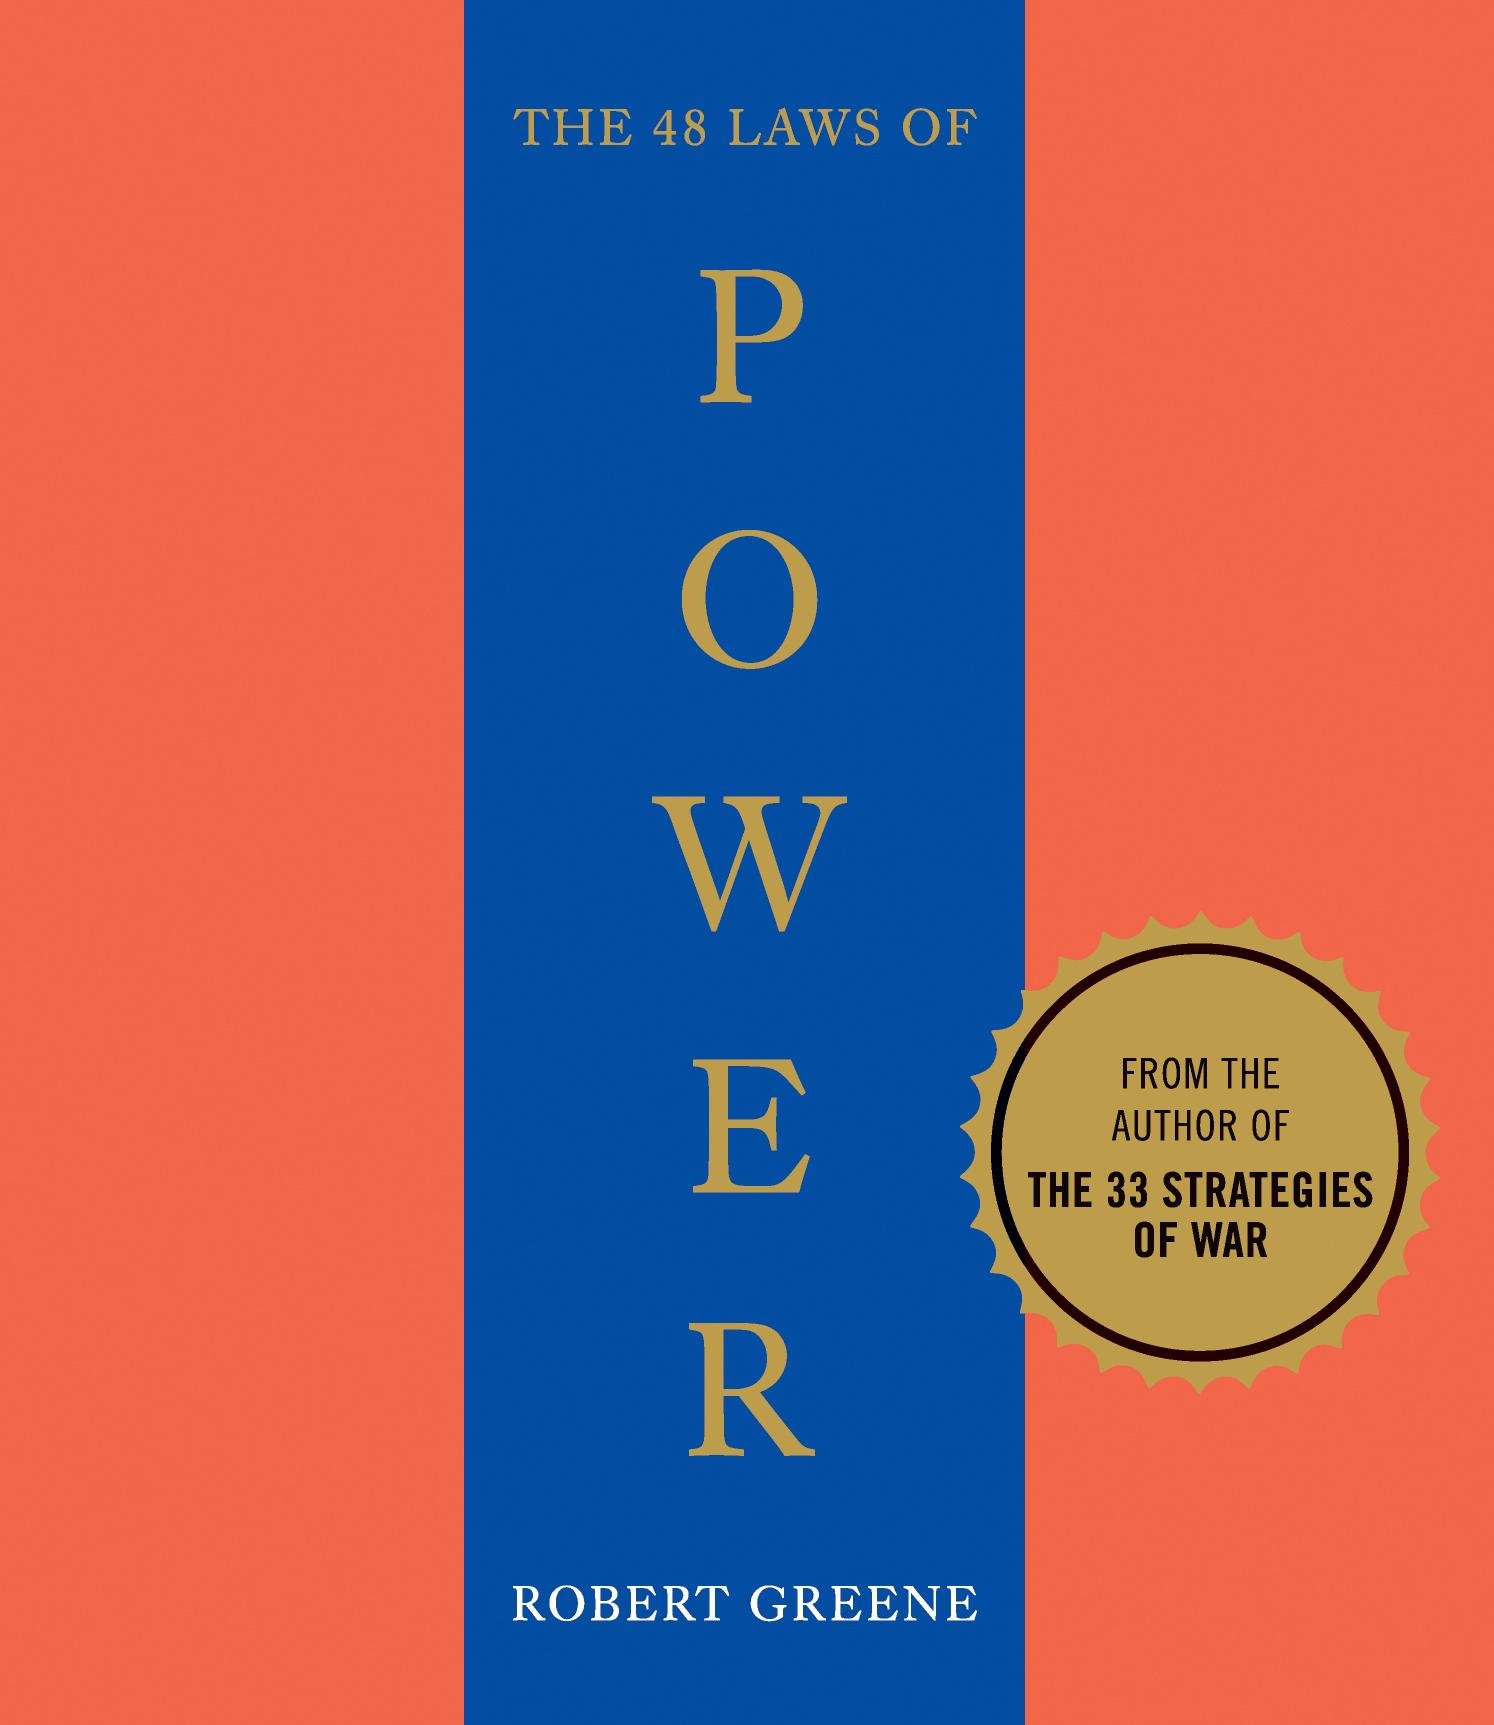 The 48 laws of power (AudiobookFormat, 1998)